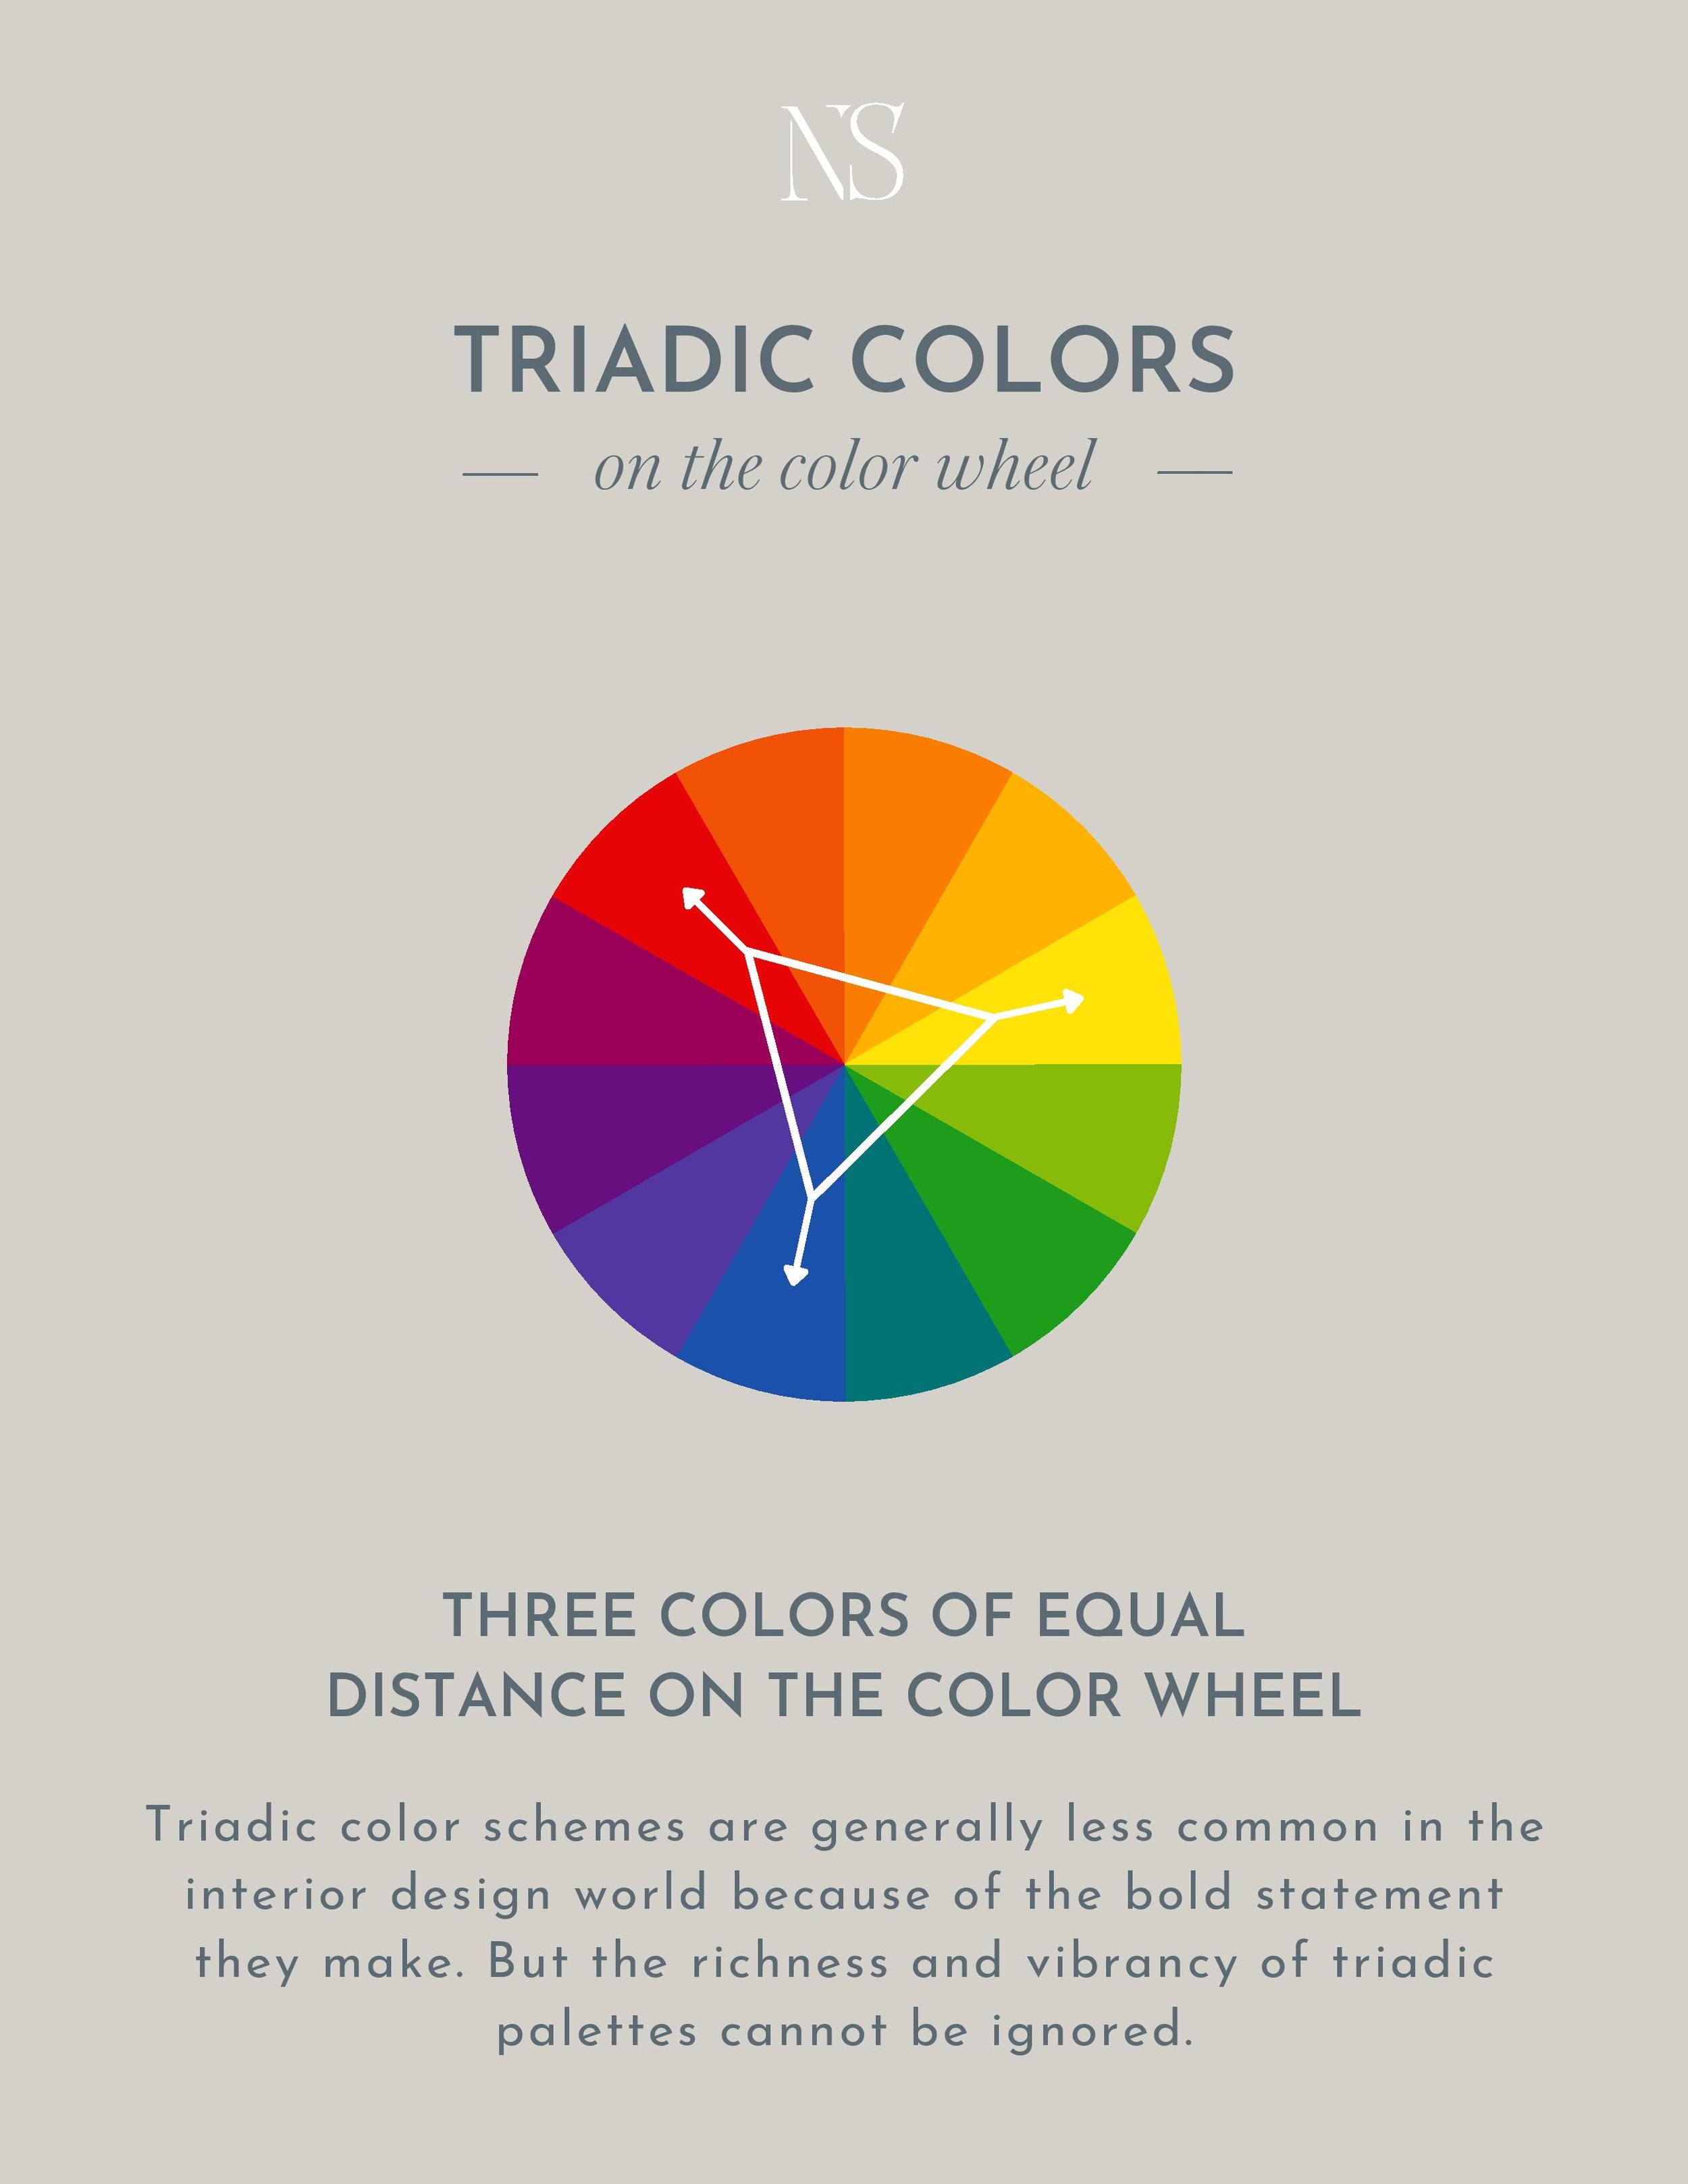 How to pick a color palette for your home. Triadic color schemes I love. Definition of triadic colors on the color wheel. Red, blue, and yellow rooms that don't look childish. Green, Purple, and Orange rooms. | Nadine Stay